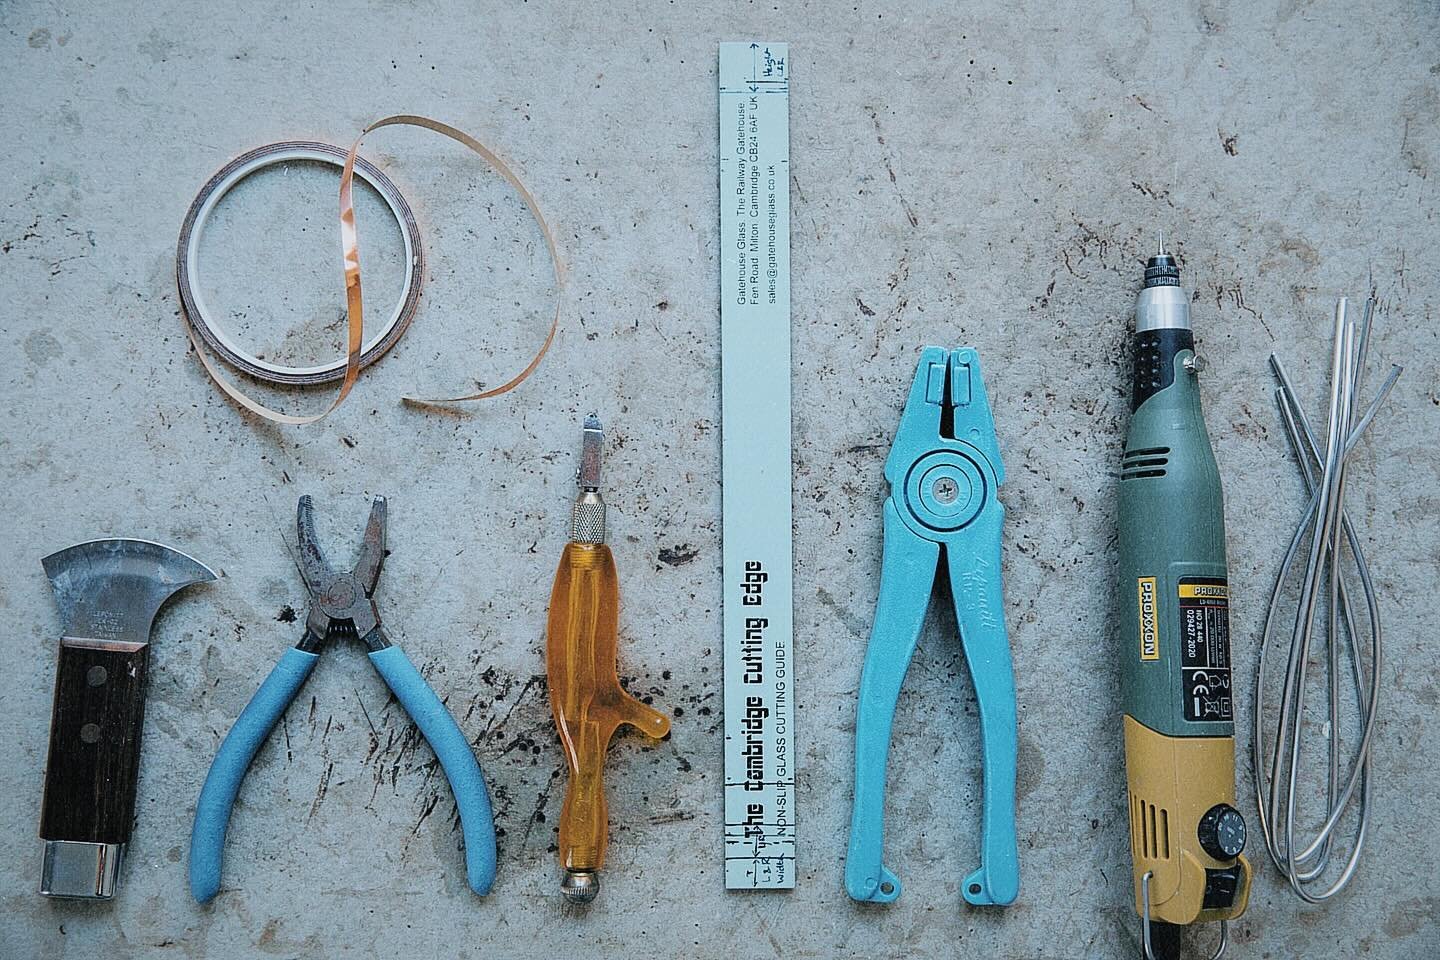 Tools of my trade&hellip; #handmade ⚒️🖤

📸 Captured by @saranicomedi @saranicoad_photography 

🎼Witness Dub - Roots Manuva @rootsmanuvaofficial 

#glassbybutler #toolsofthetrade #tools #copperfoil #engraving #tiffanytechnique #makermovement #craft